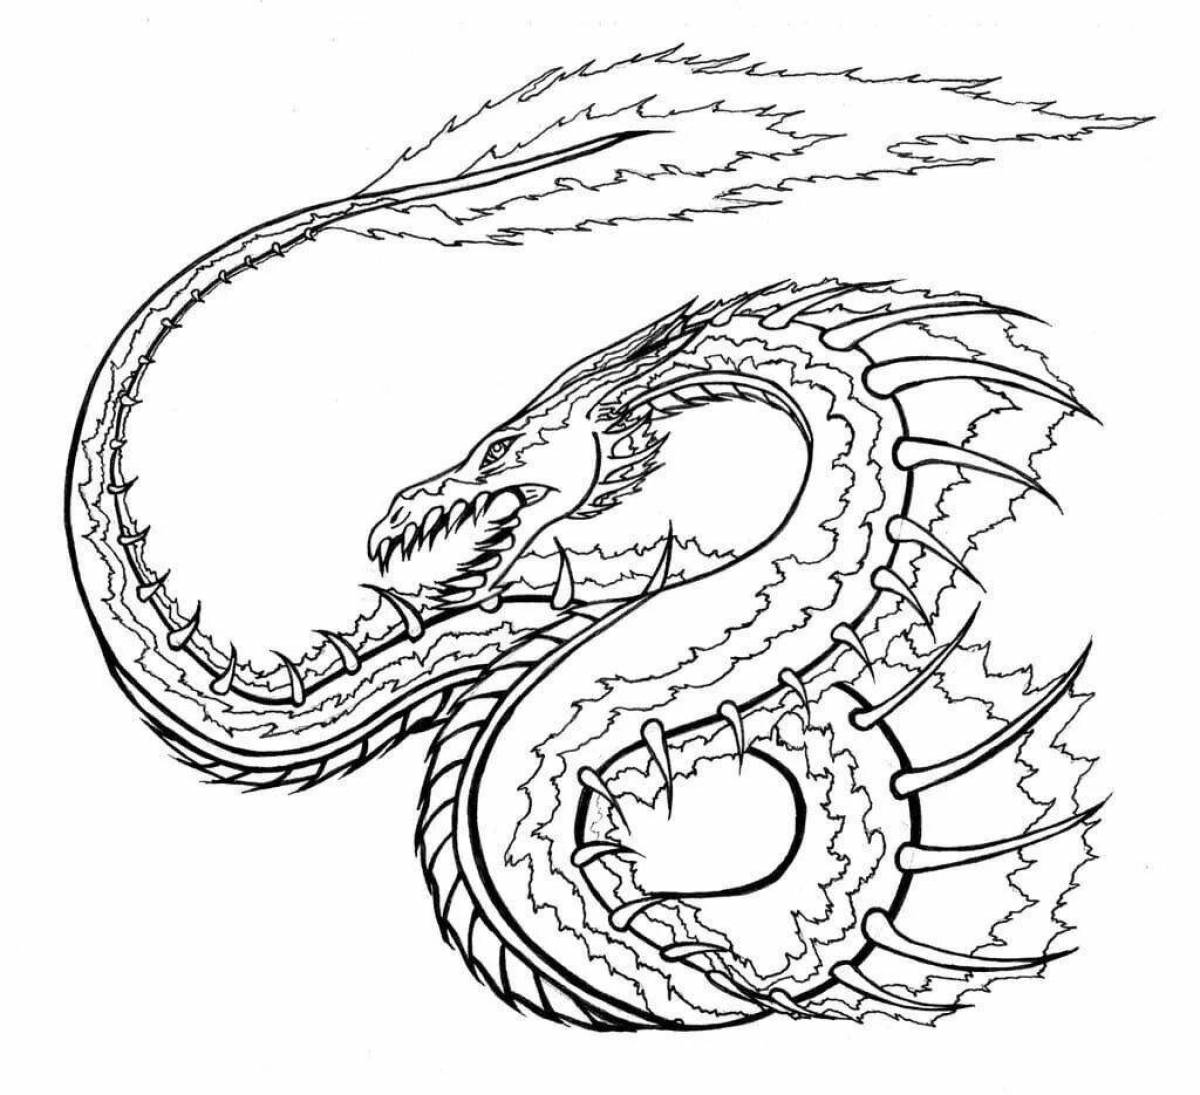 Brightly colored Chinese dragon coloring book